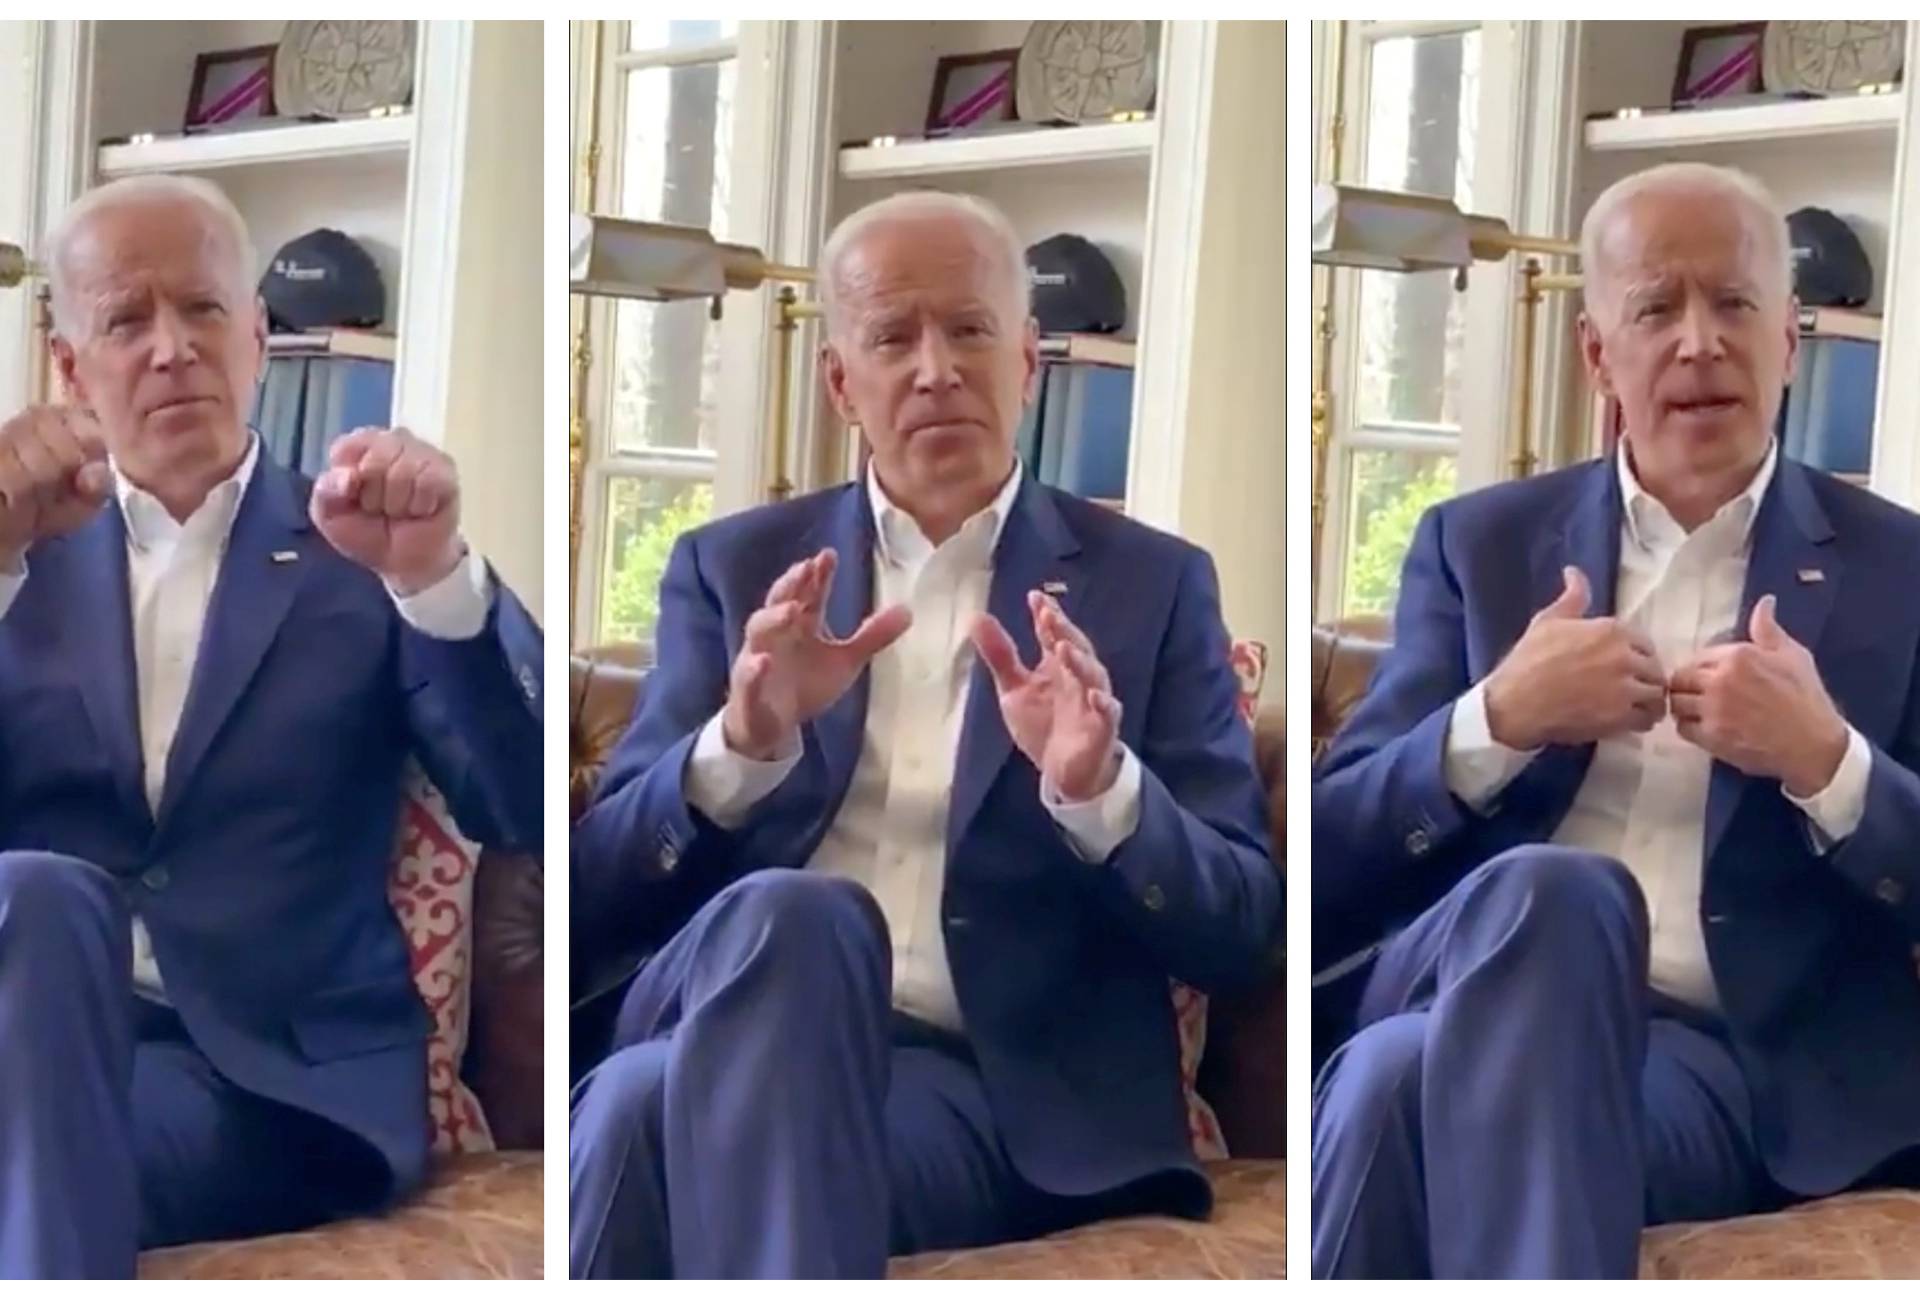 Former U.S. Vice President Joe Biden appears in a video in which he pledges to be "more mindful about respecting personal space in the future